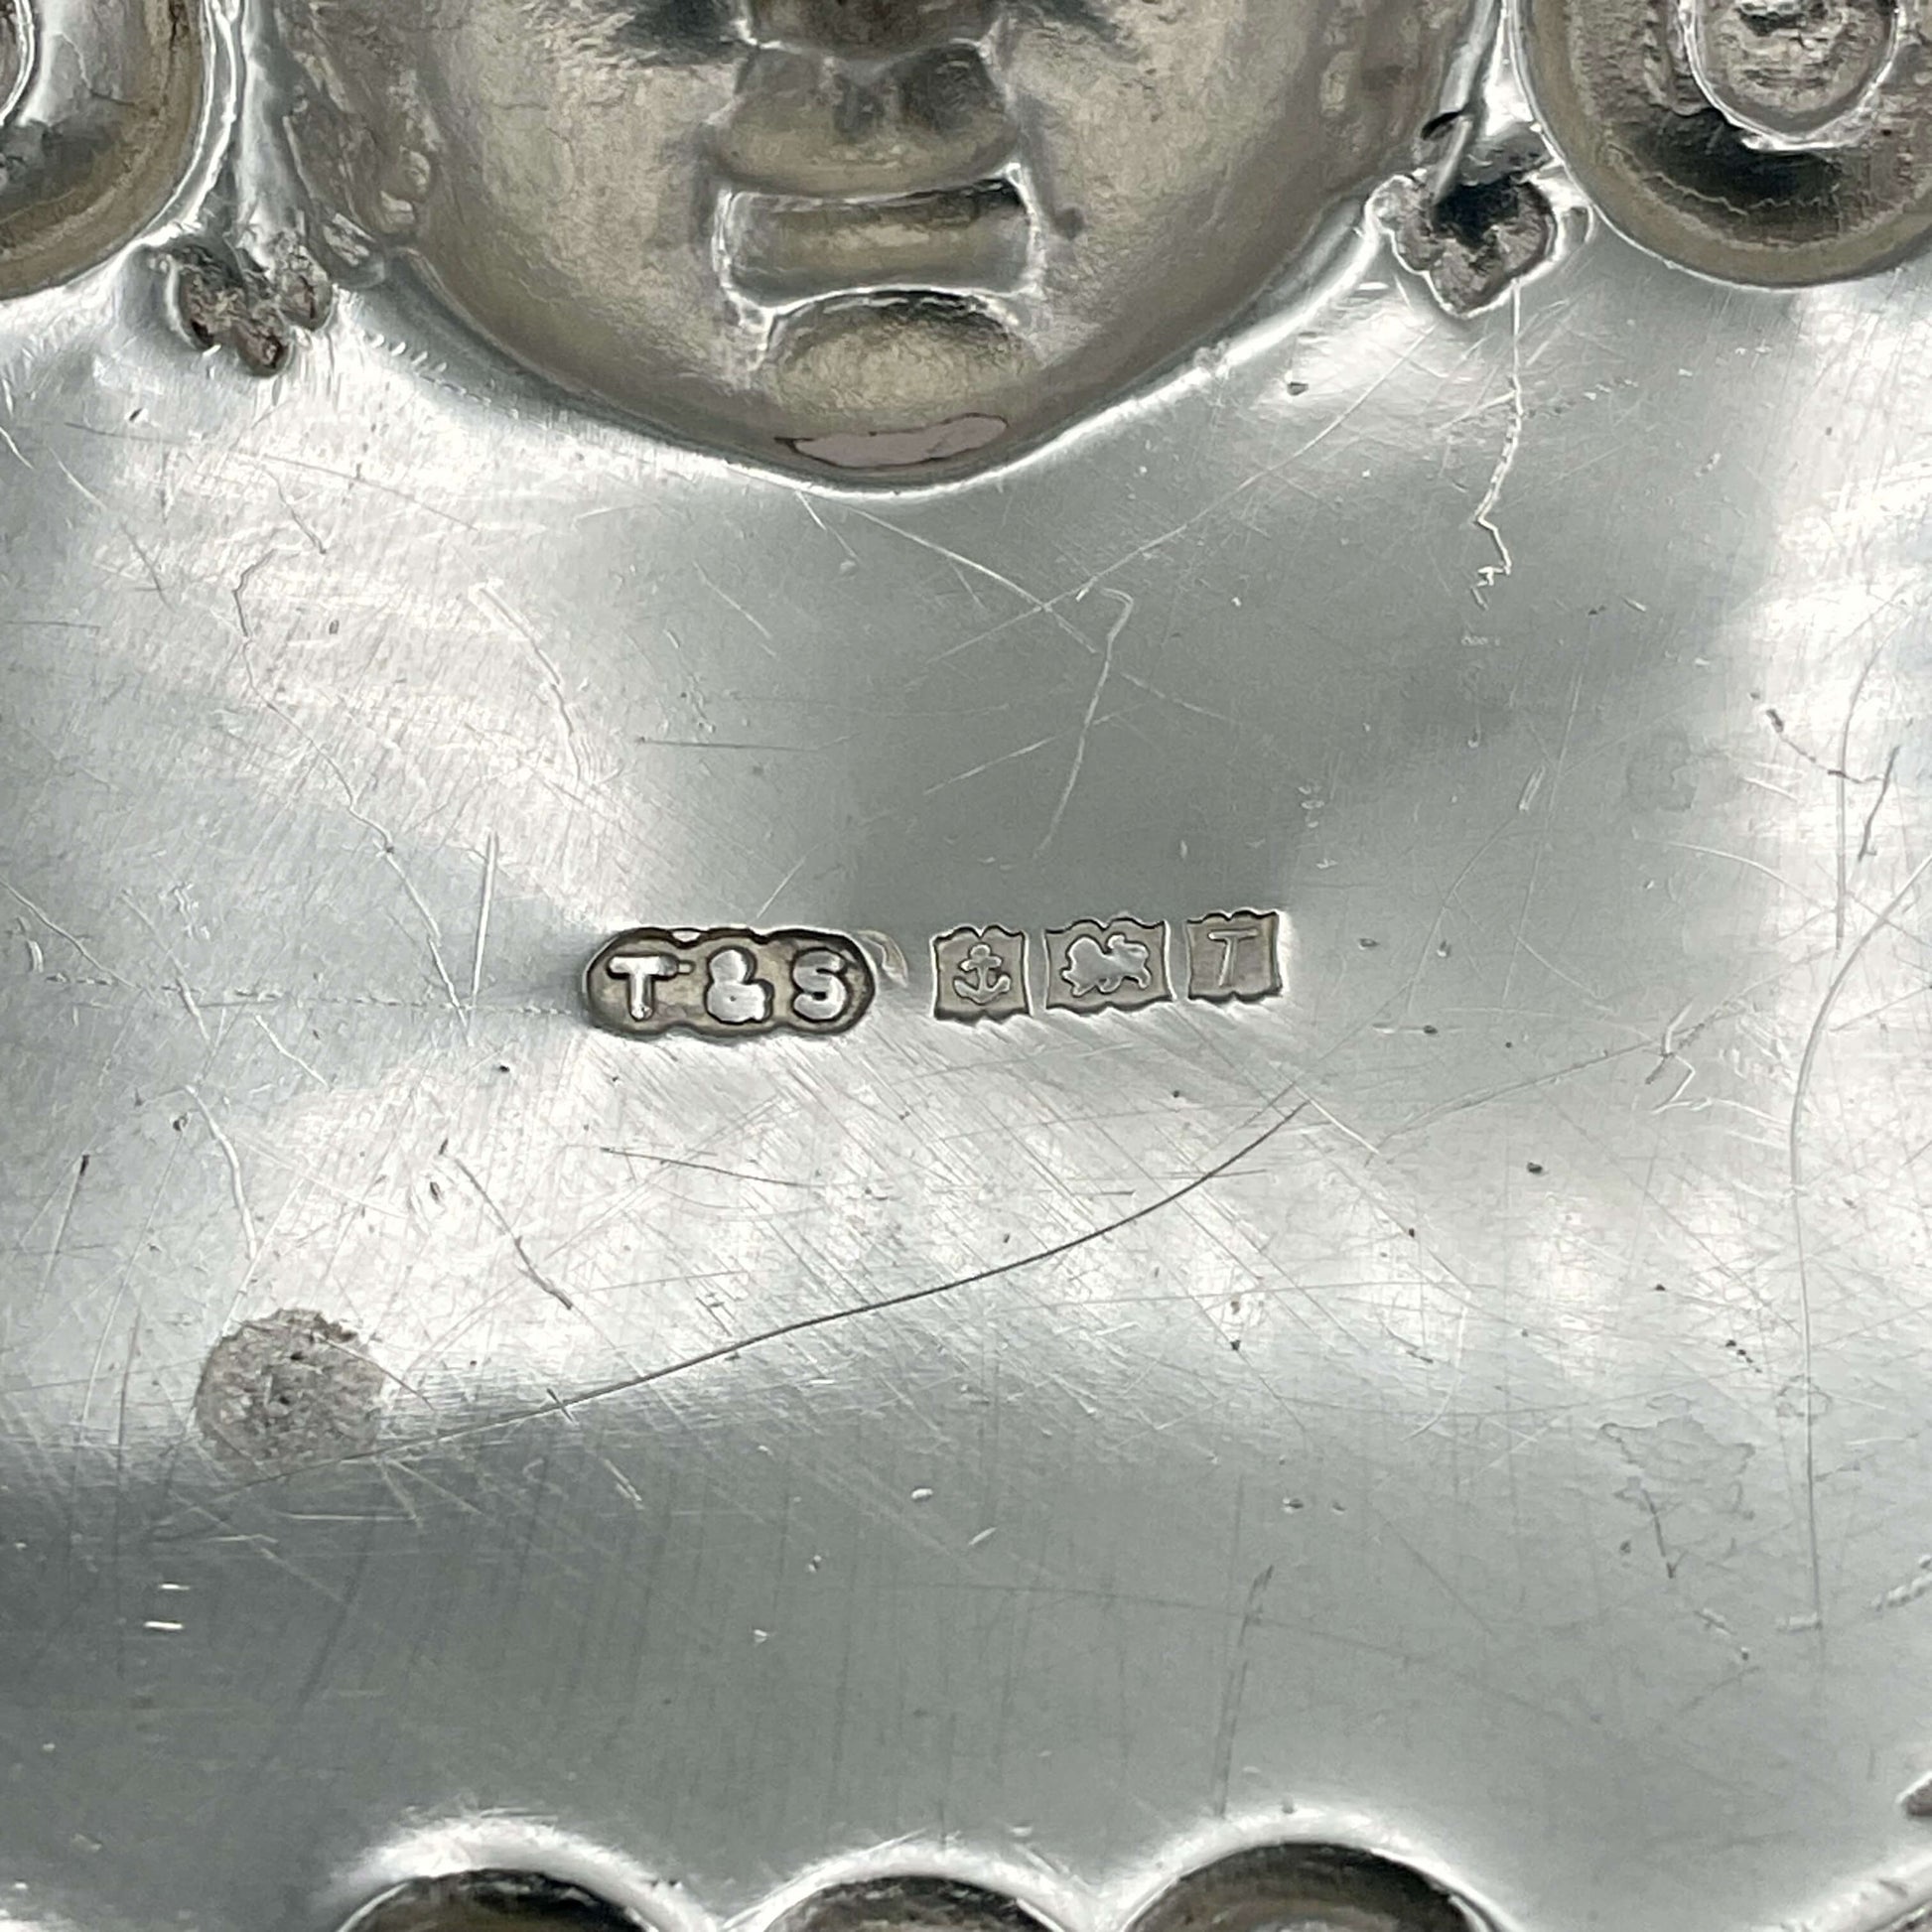 back of whisky decanter label showing the makers mark and hallmarks